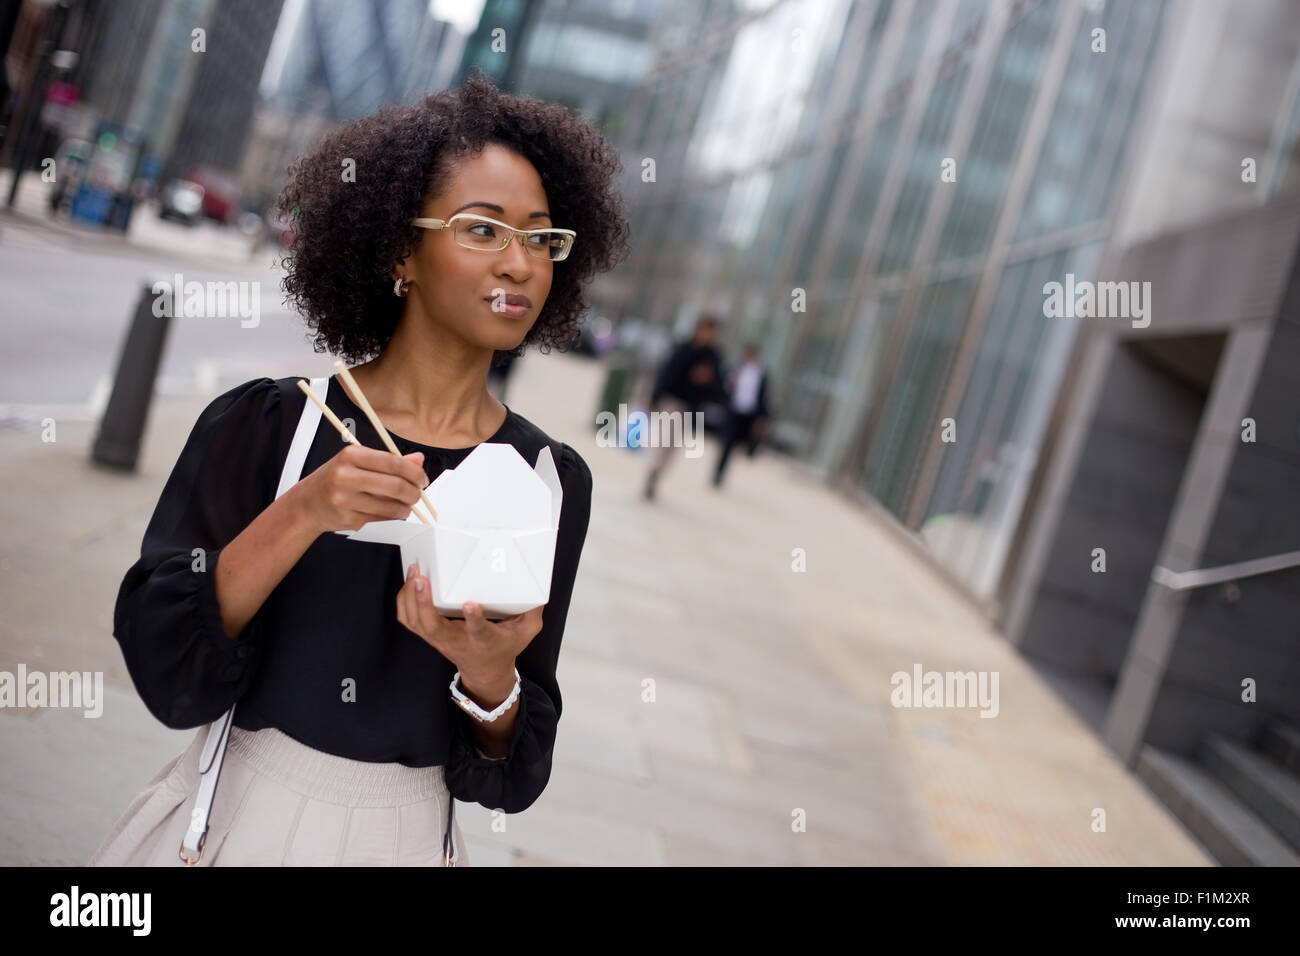 young woman eating a take-away in the city Stock Photo